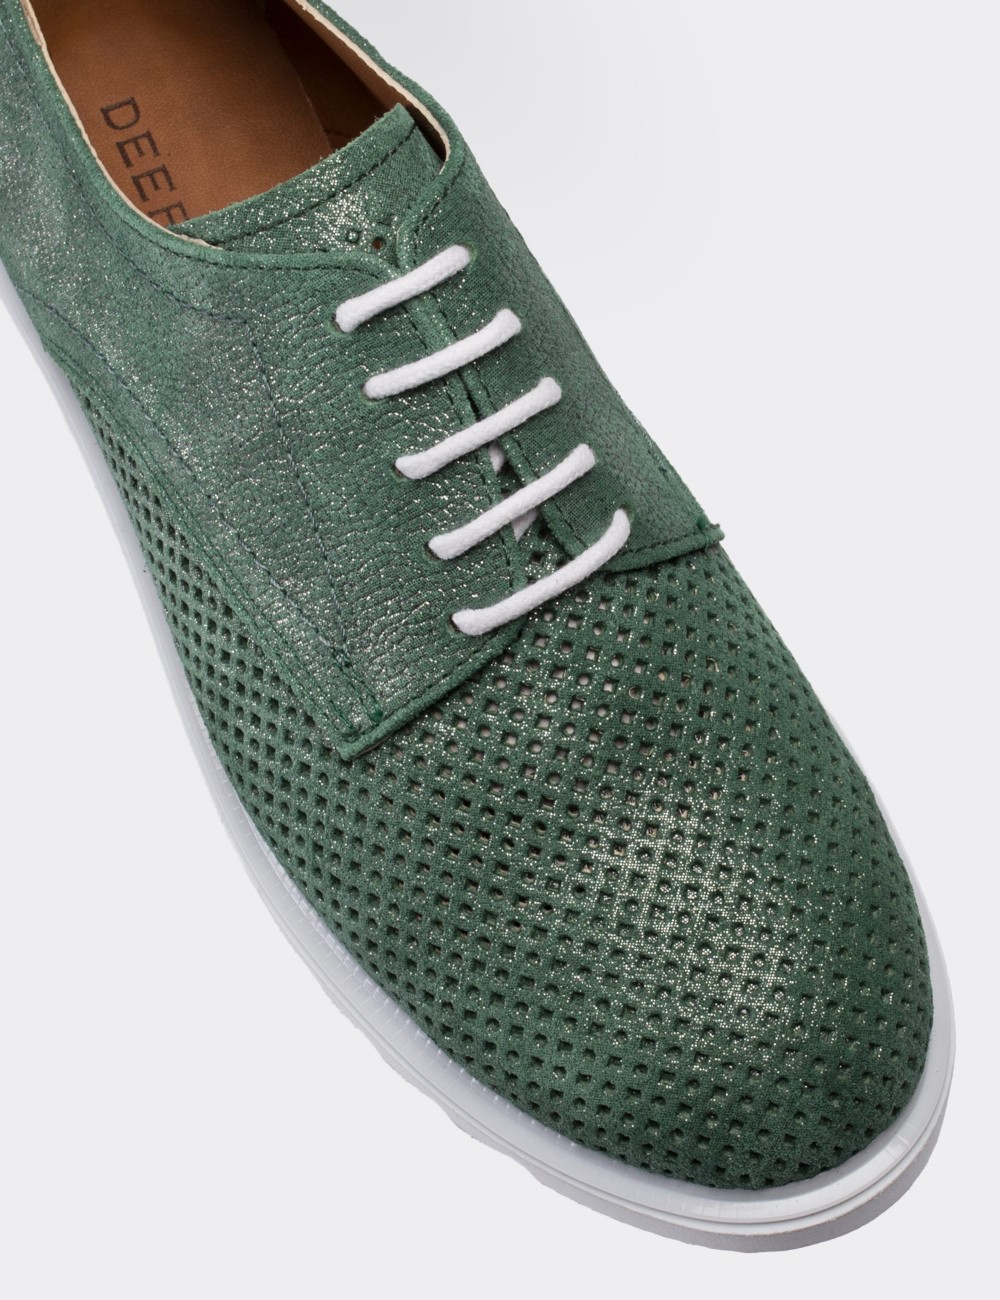 Green Suede Leather Lace-up Shoes - 01430ZYSLP02